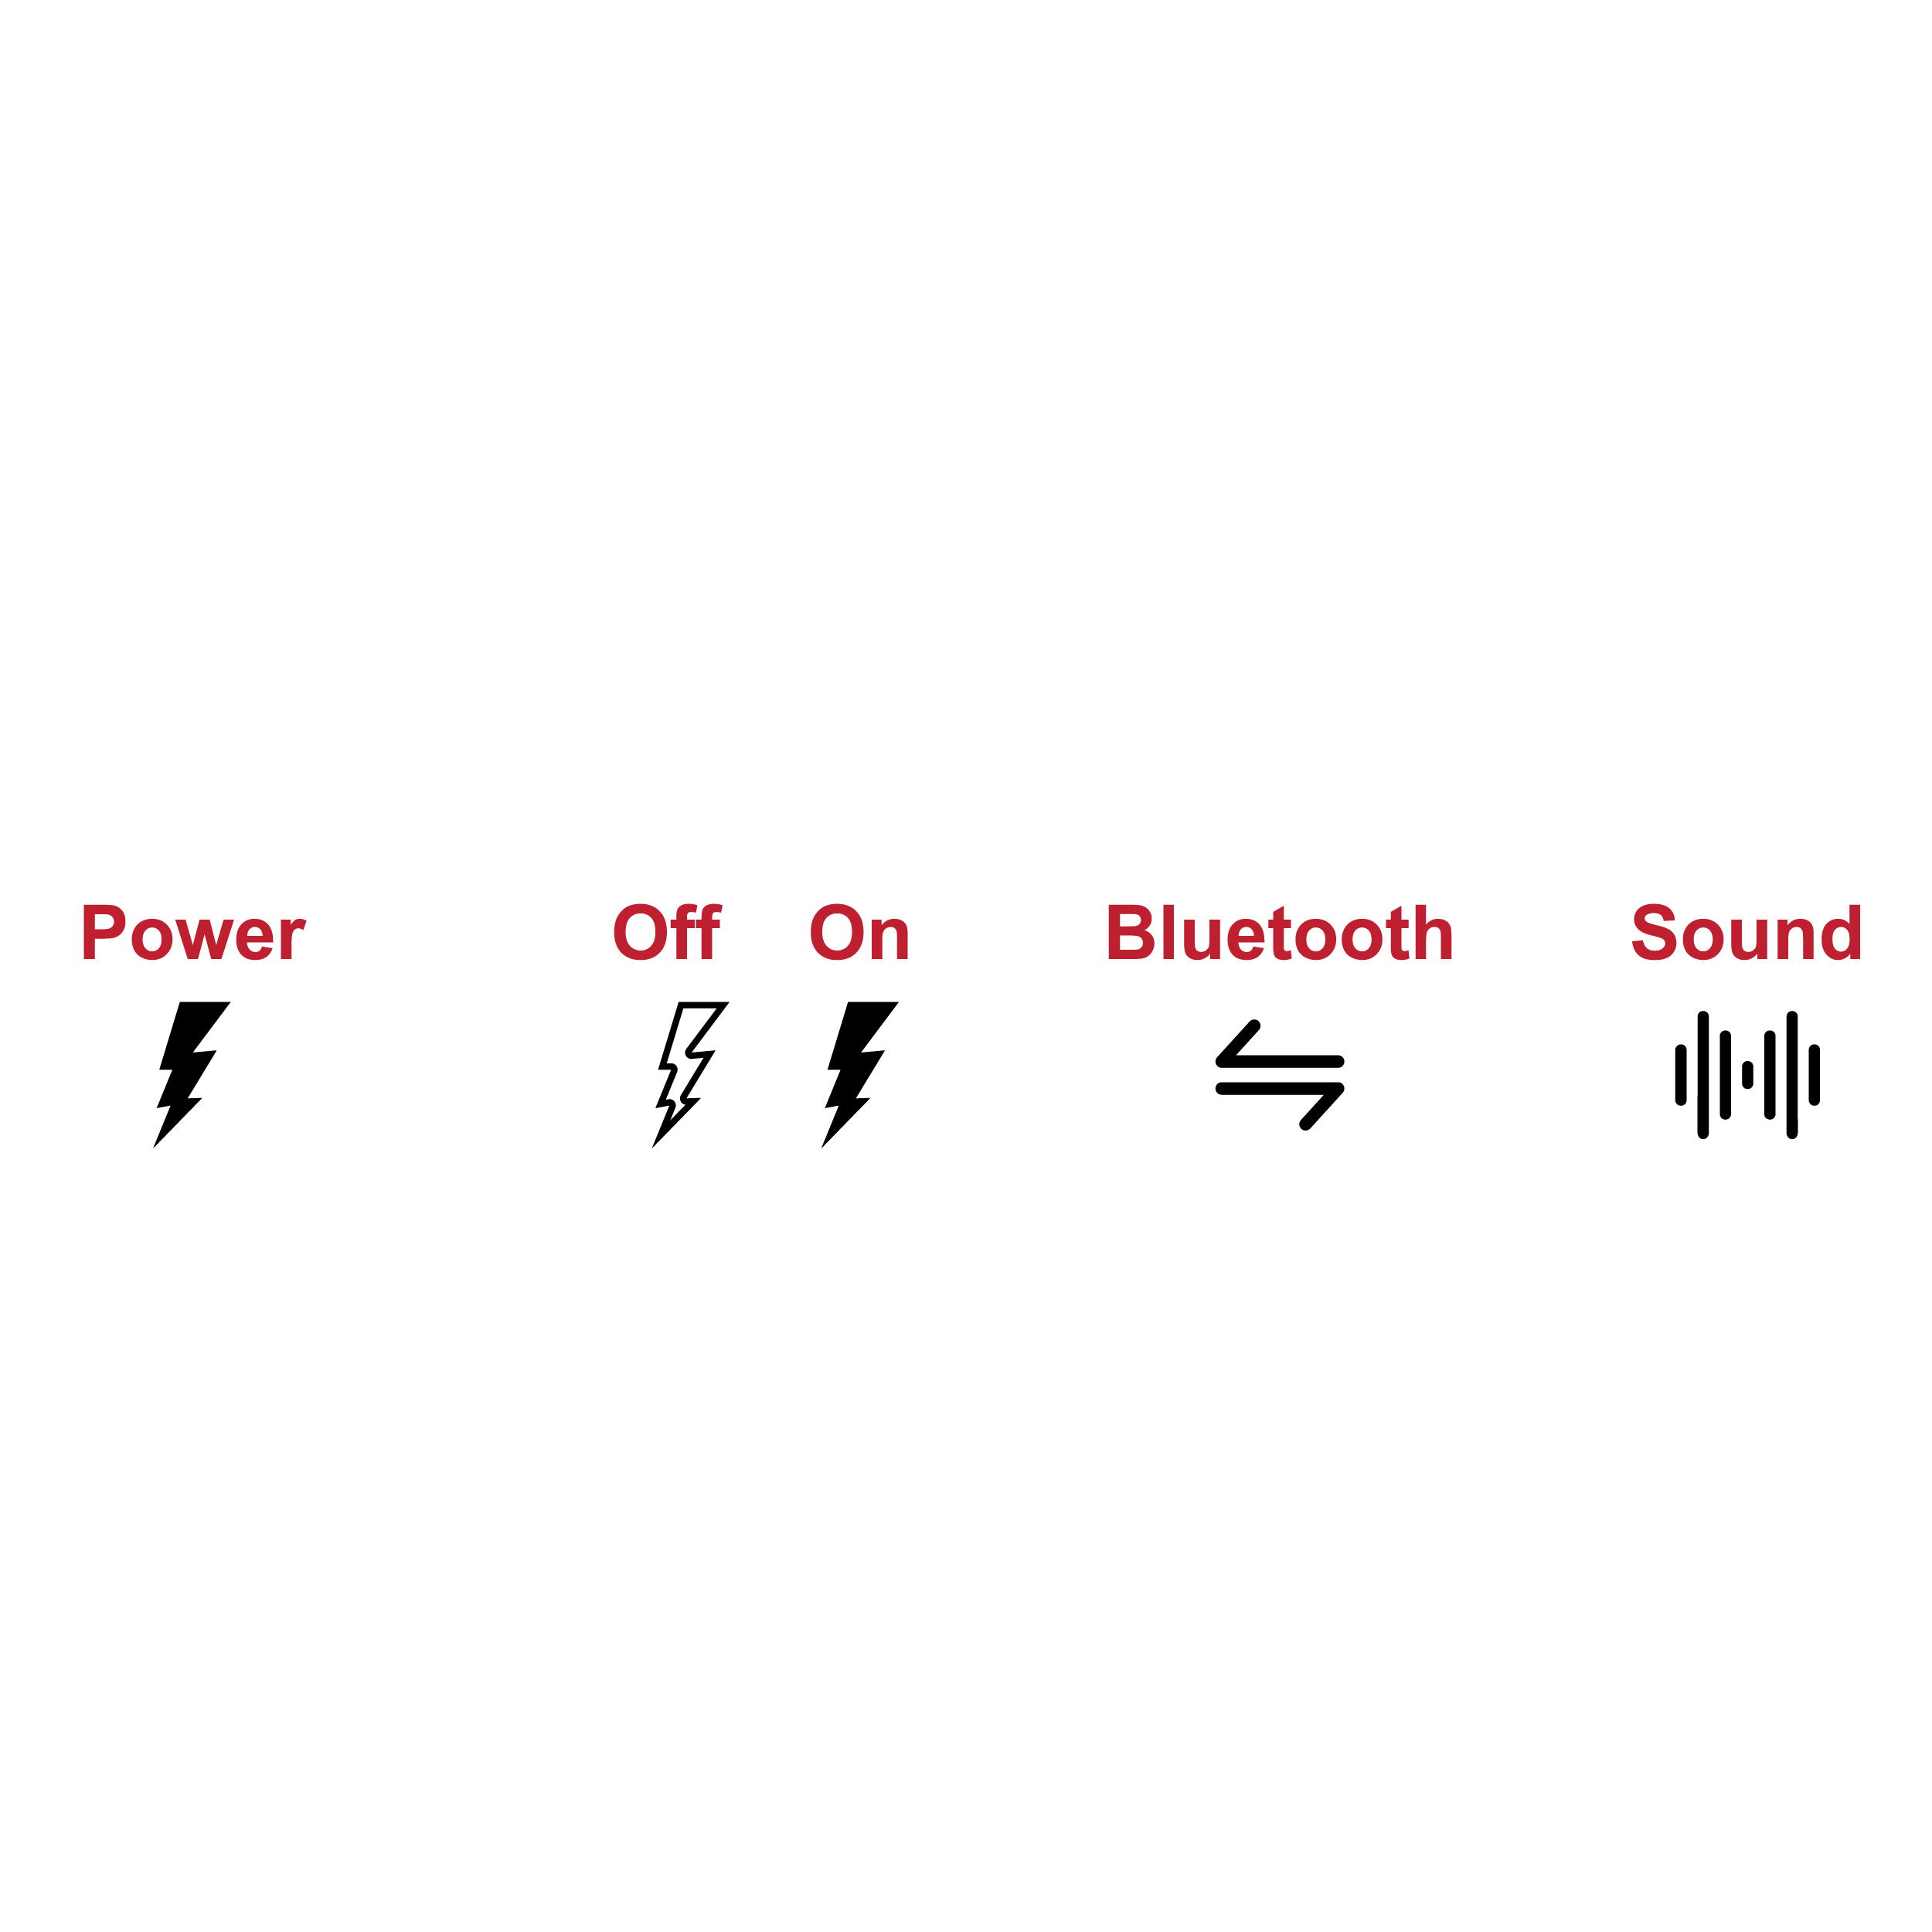 Non-standard symbols representing power, off, on, Bluetooth, and sound with text labels.